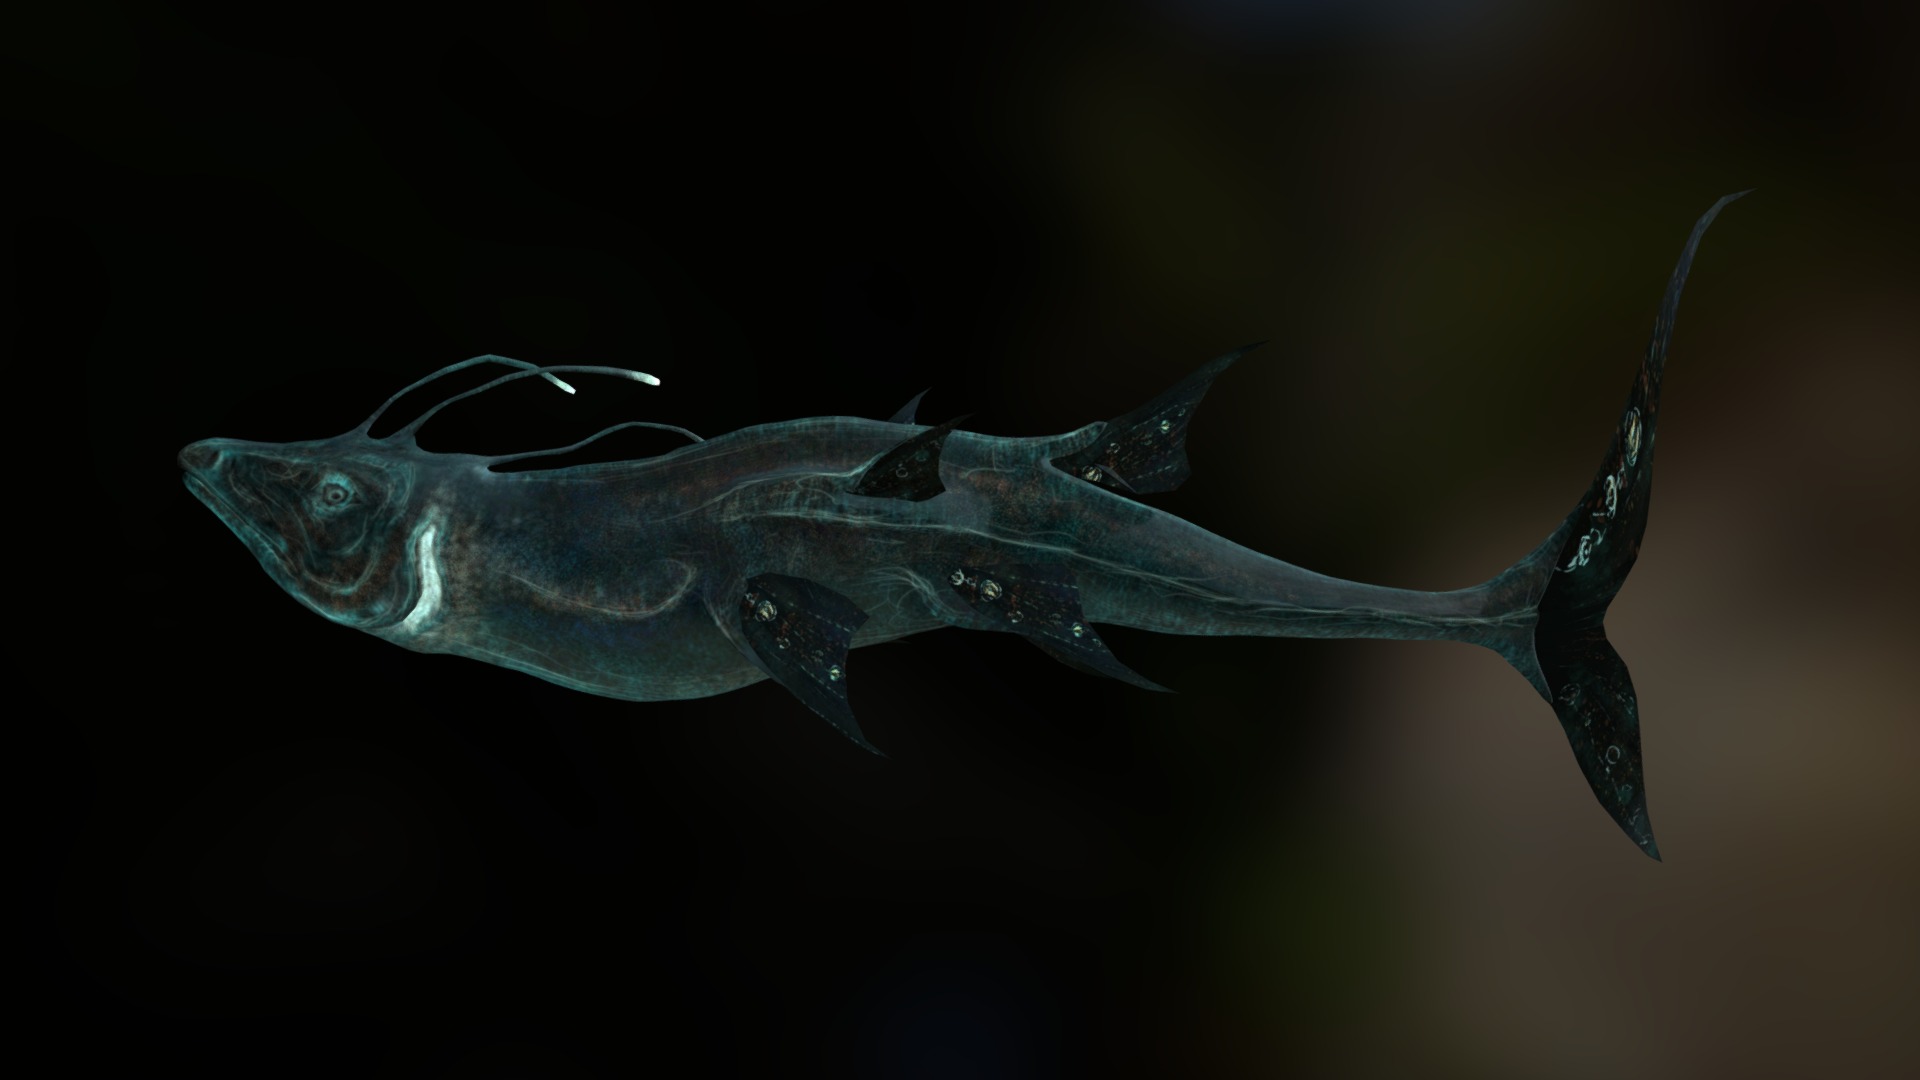 3D model Fantastical Fish - This is a 3D model of the Fantastical Fish. The 3D model is about a fish swimming in water.